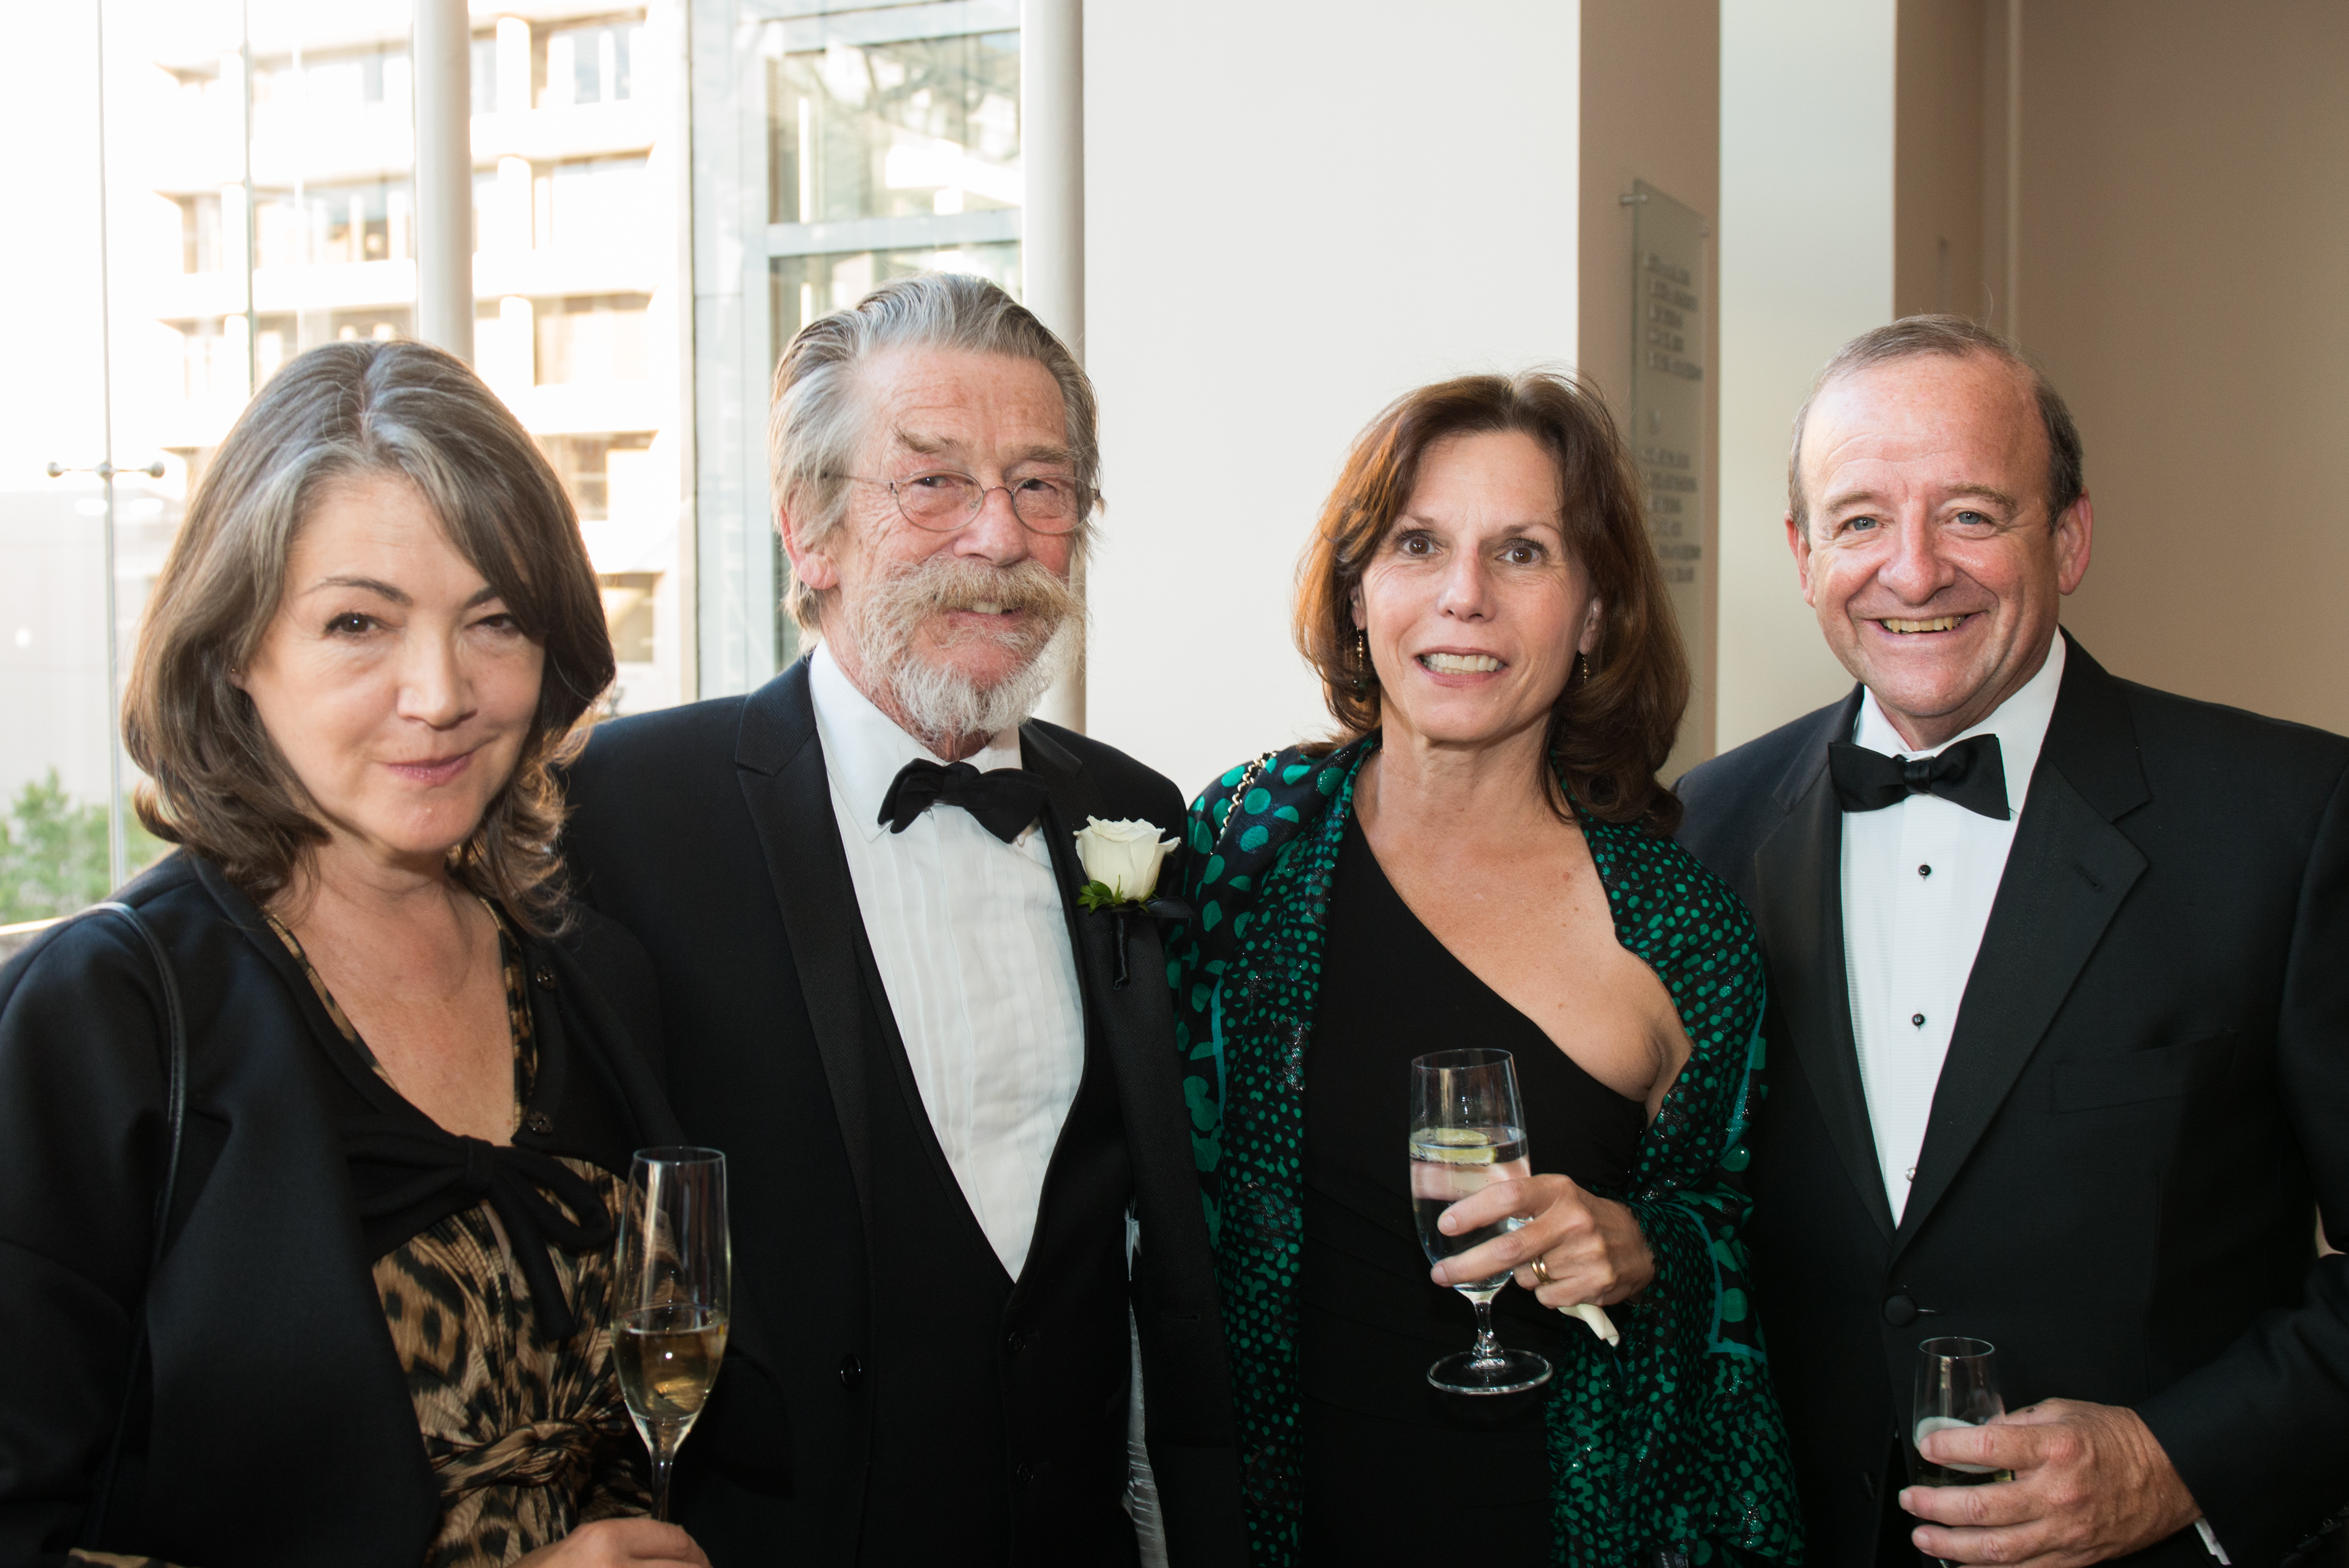 Much Ado About… Shakespeare! at the 2014 Will Awards